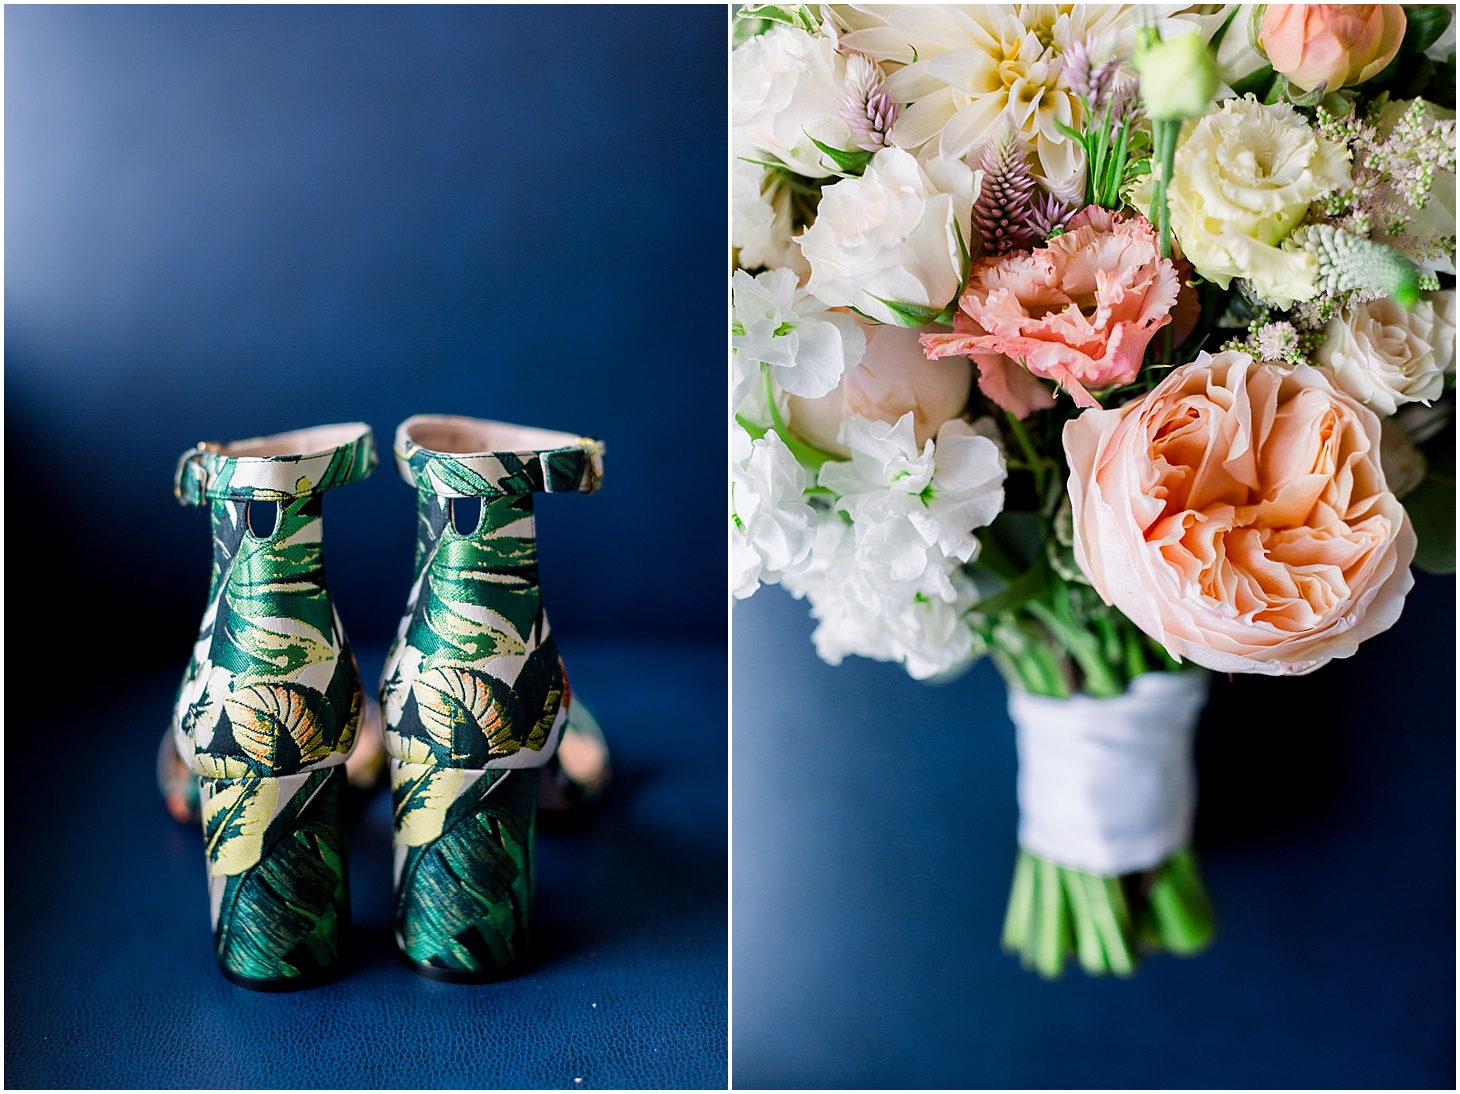 Stuart Weitzman Shoes and Love Blooms Bouquet | Chic and Modern Interfaith Wedding at District Winery in Washington, DC | Sarah Bradshaw Photography